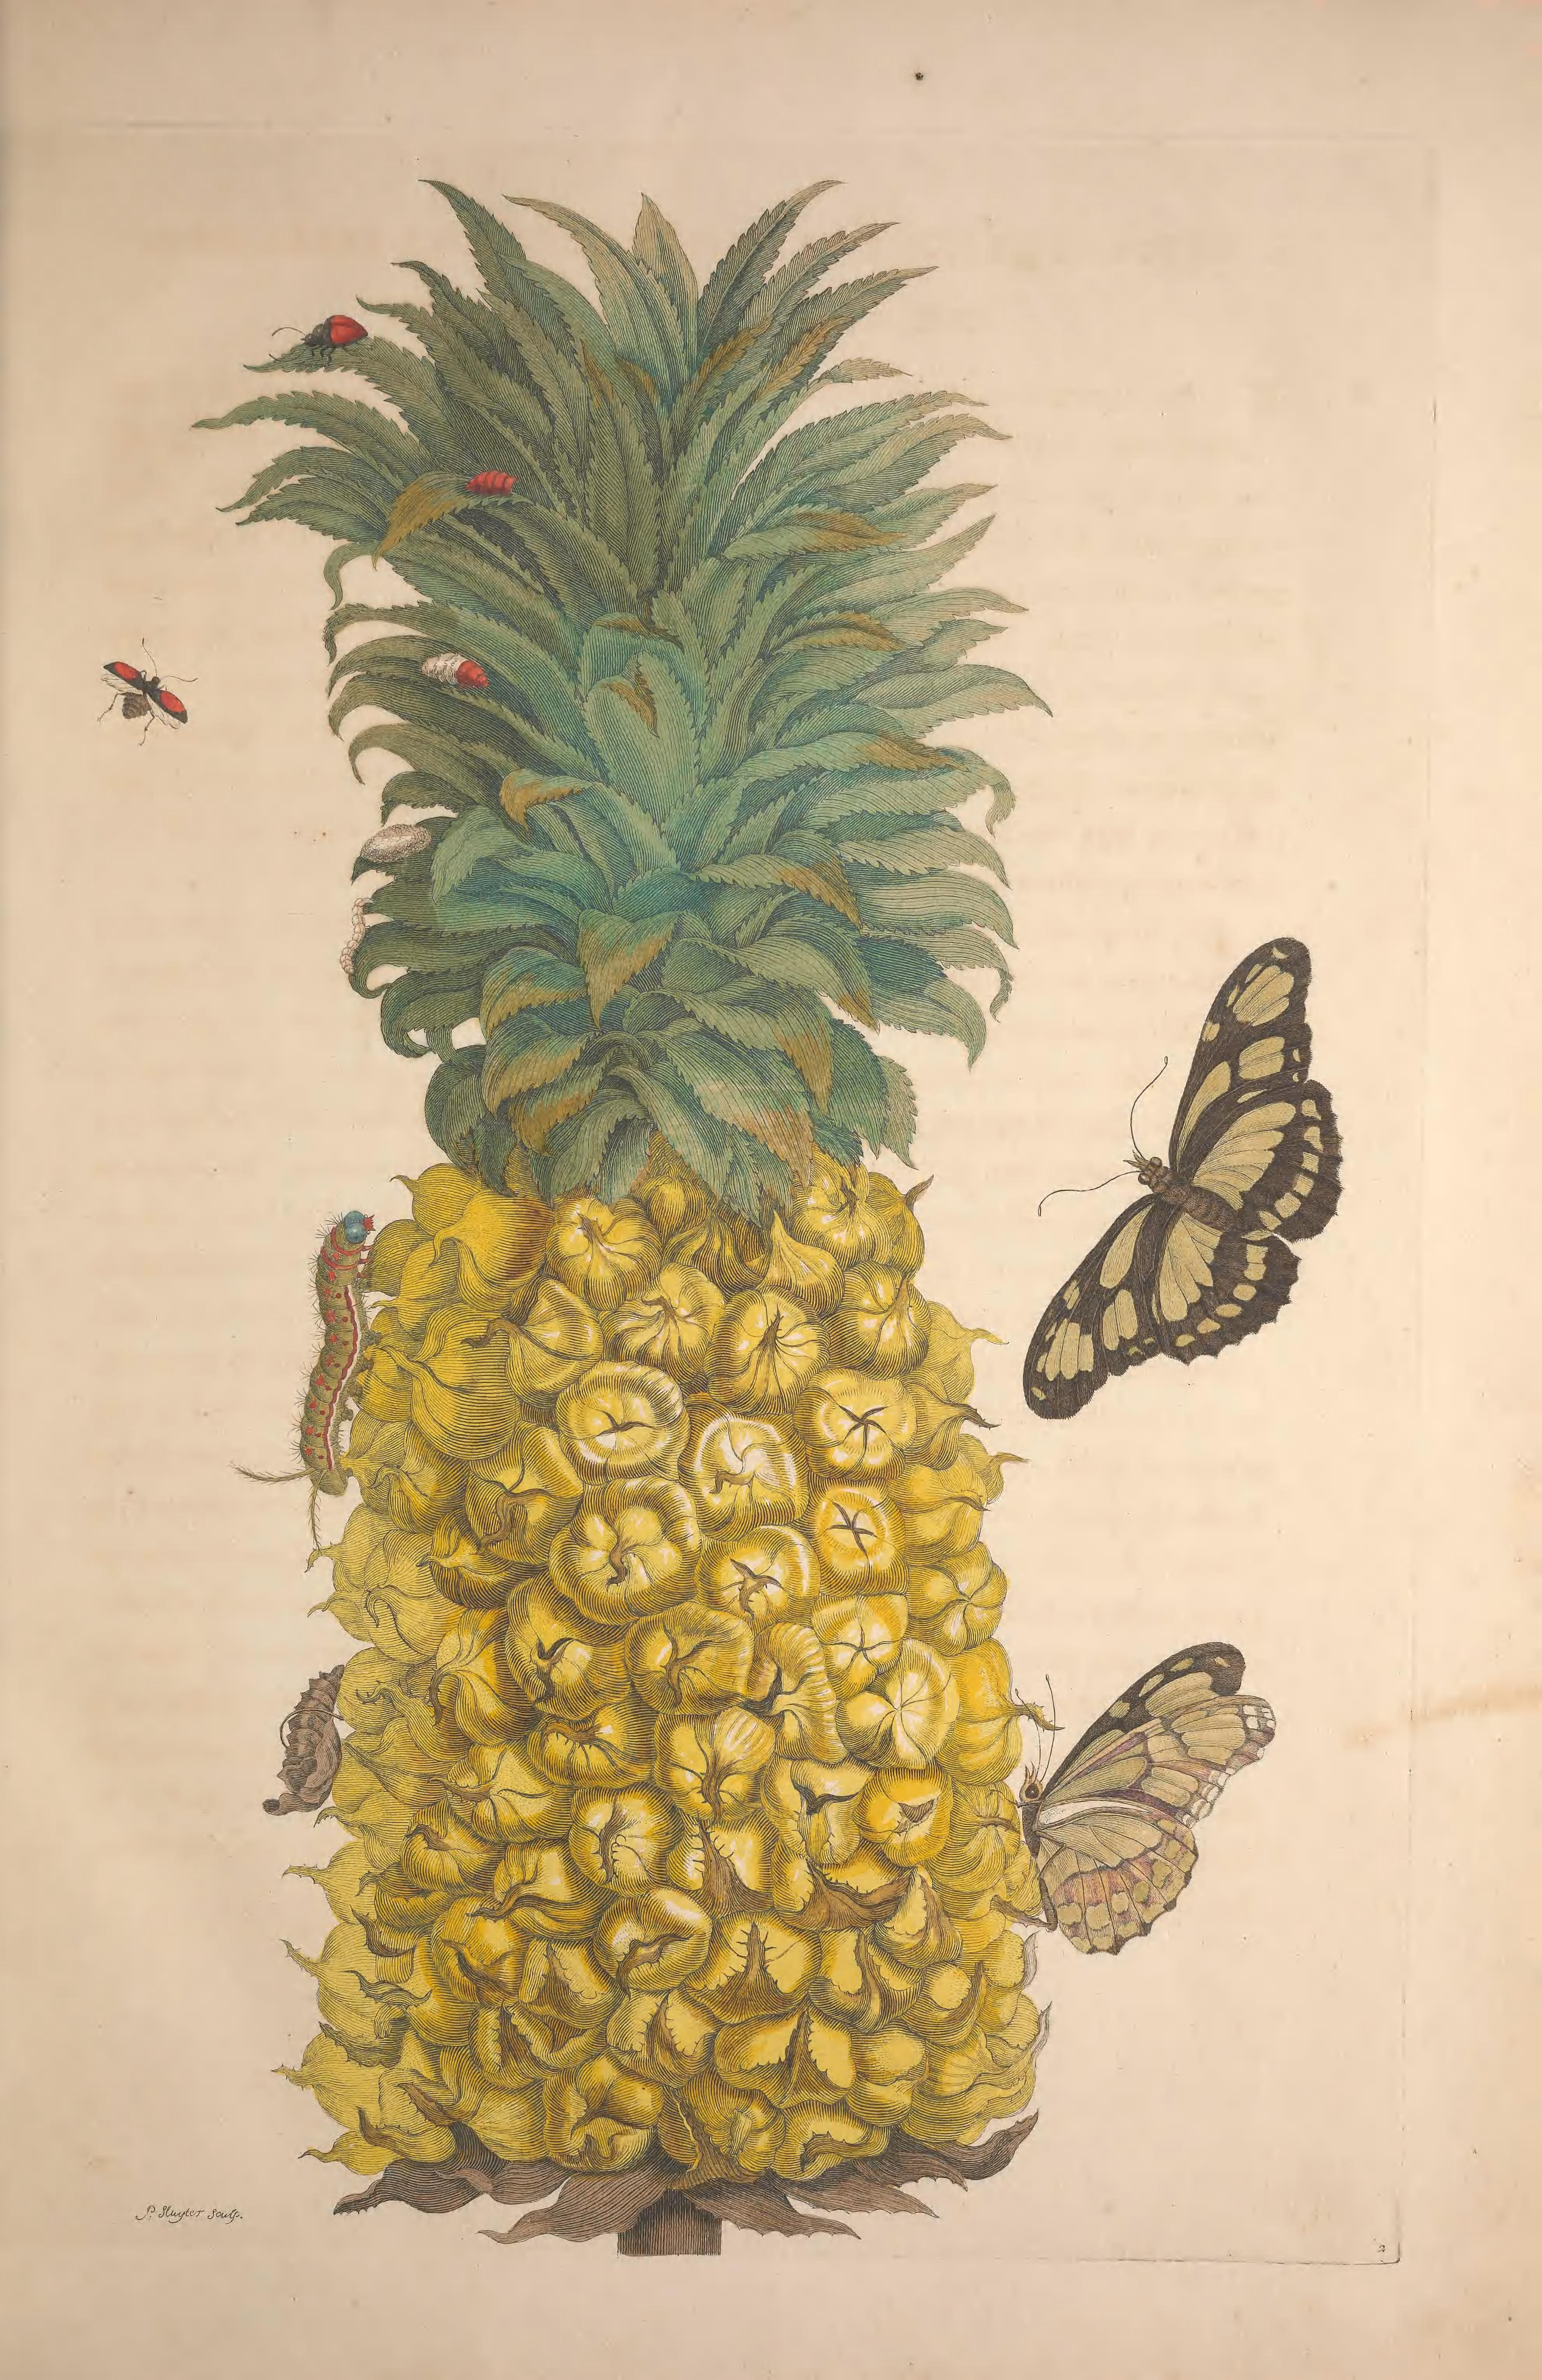 Illustration of butterflies and a pineapple from Metamorphosis insectorum Surinamensium